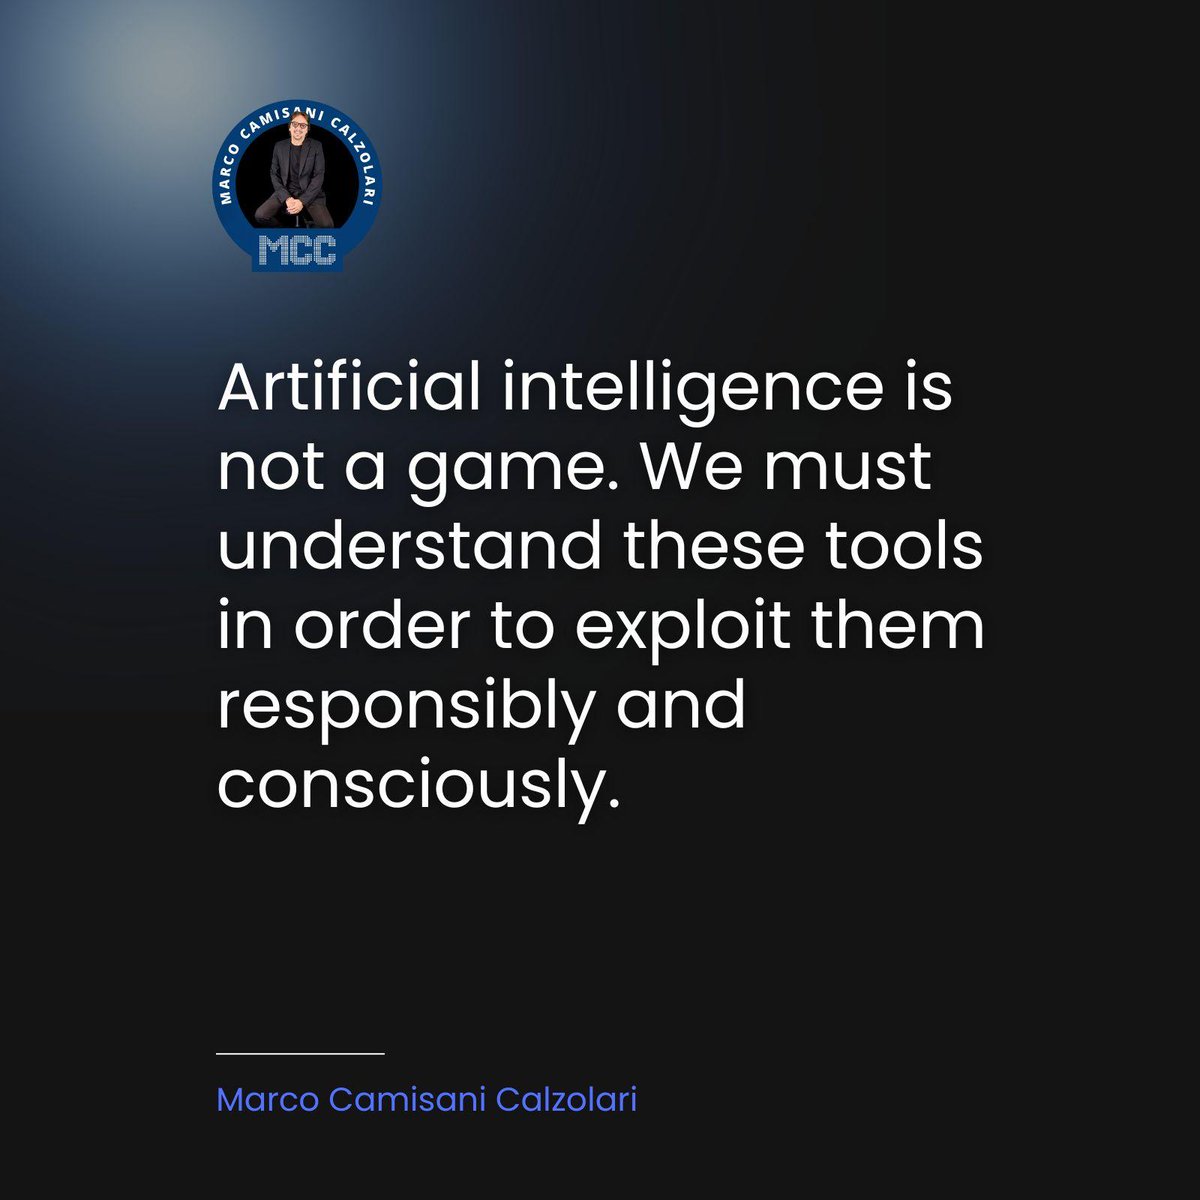 Artificial intelligence is not a game. We must understand these tools in order to exploit them responsibly and consciously. #Quote #MCC